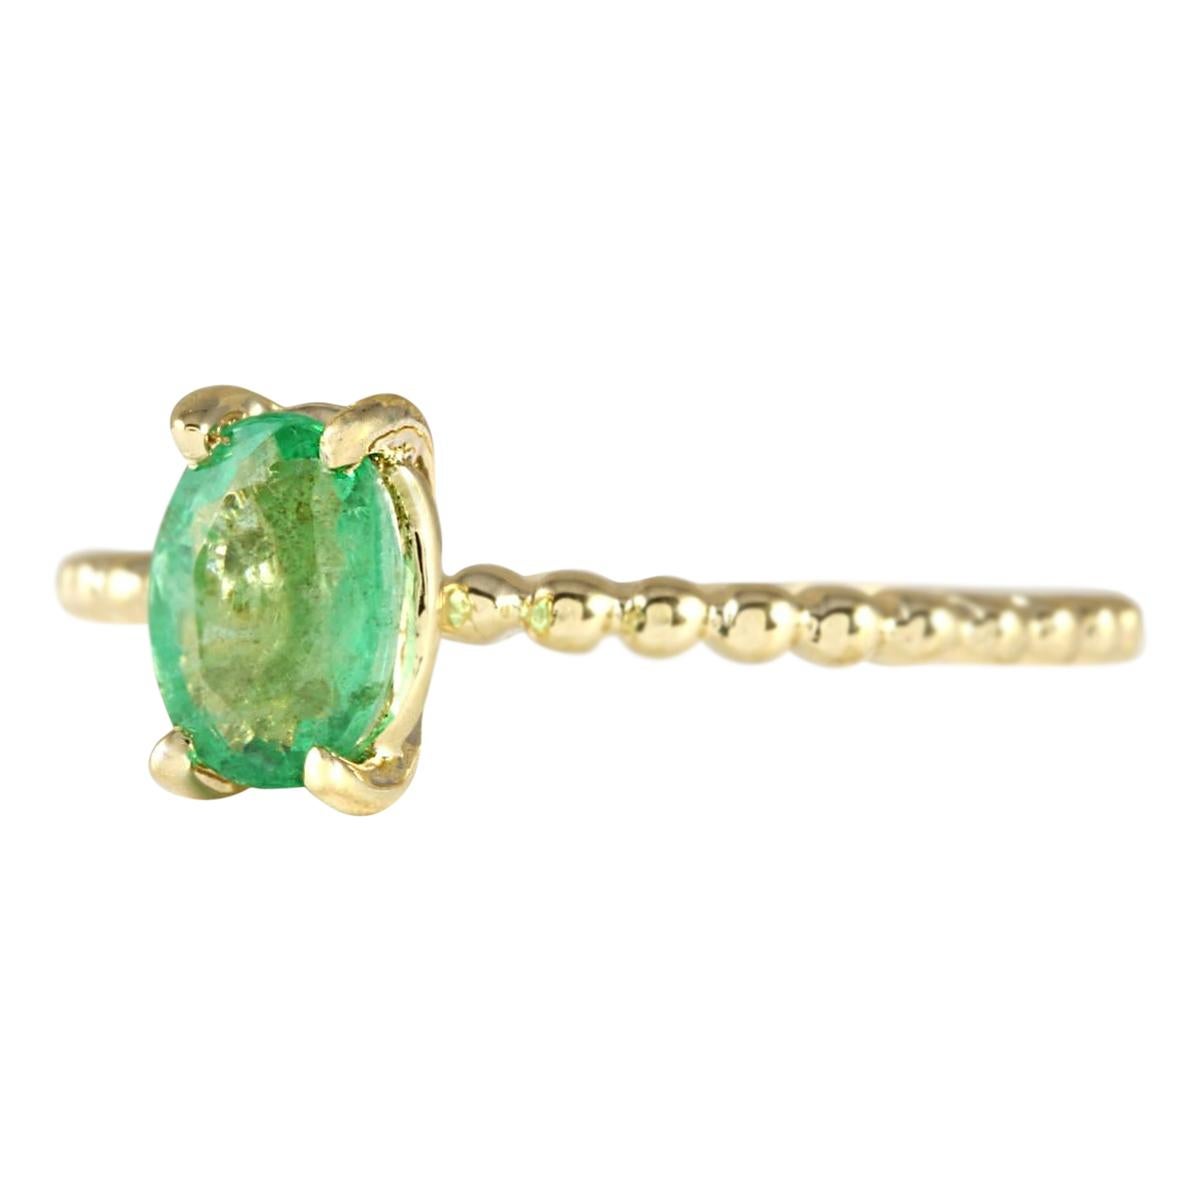 Stamped: 14K Yellow Gold
Total Ring Weight: 2.0 Grams
Total Natural Emerald Weight is 0.80 Carat
Color: Green
Face Measures: 7.00x5.00 mm
Sku: [703408W]